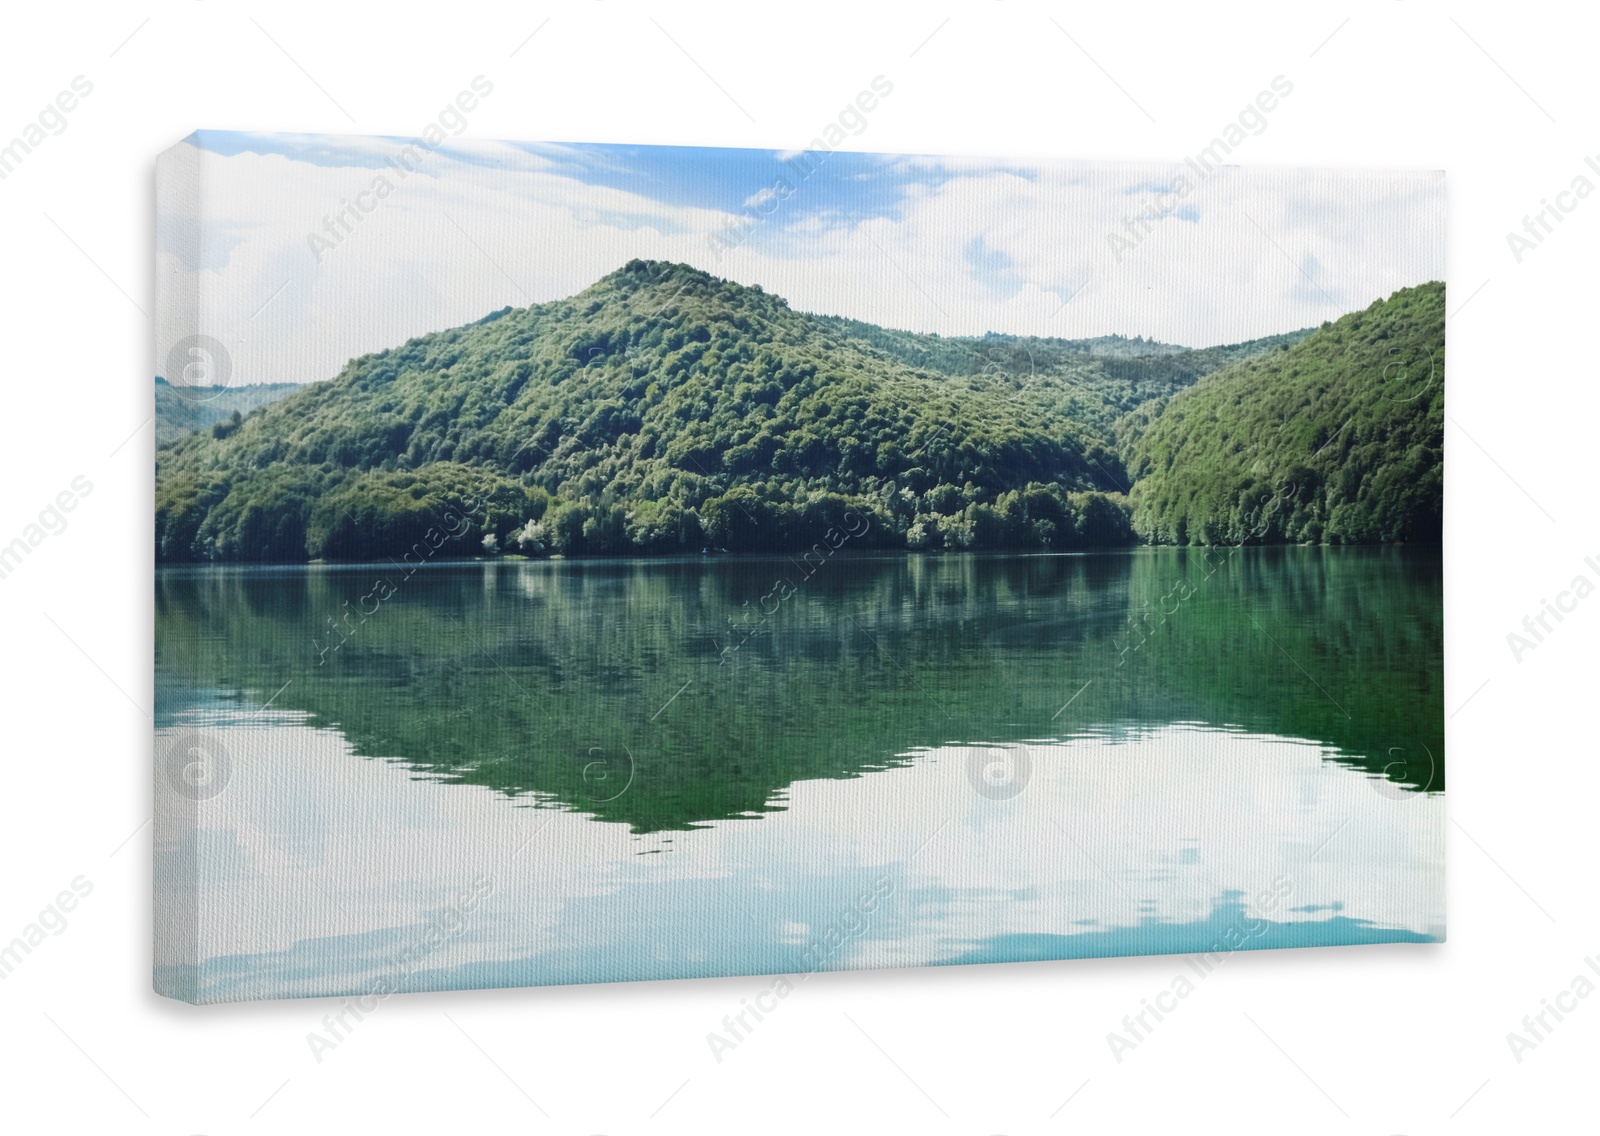 Image of Photo printed on canvas, white background. Picturesque view of beautiful lake surrounded by mountains on sunny day